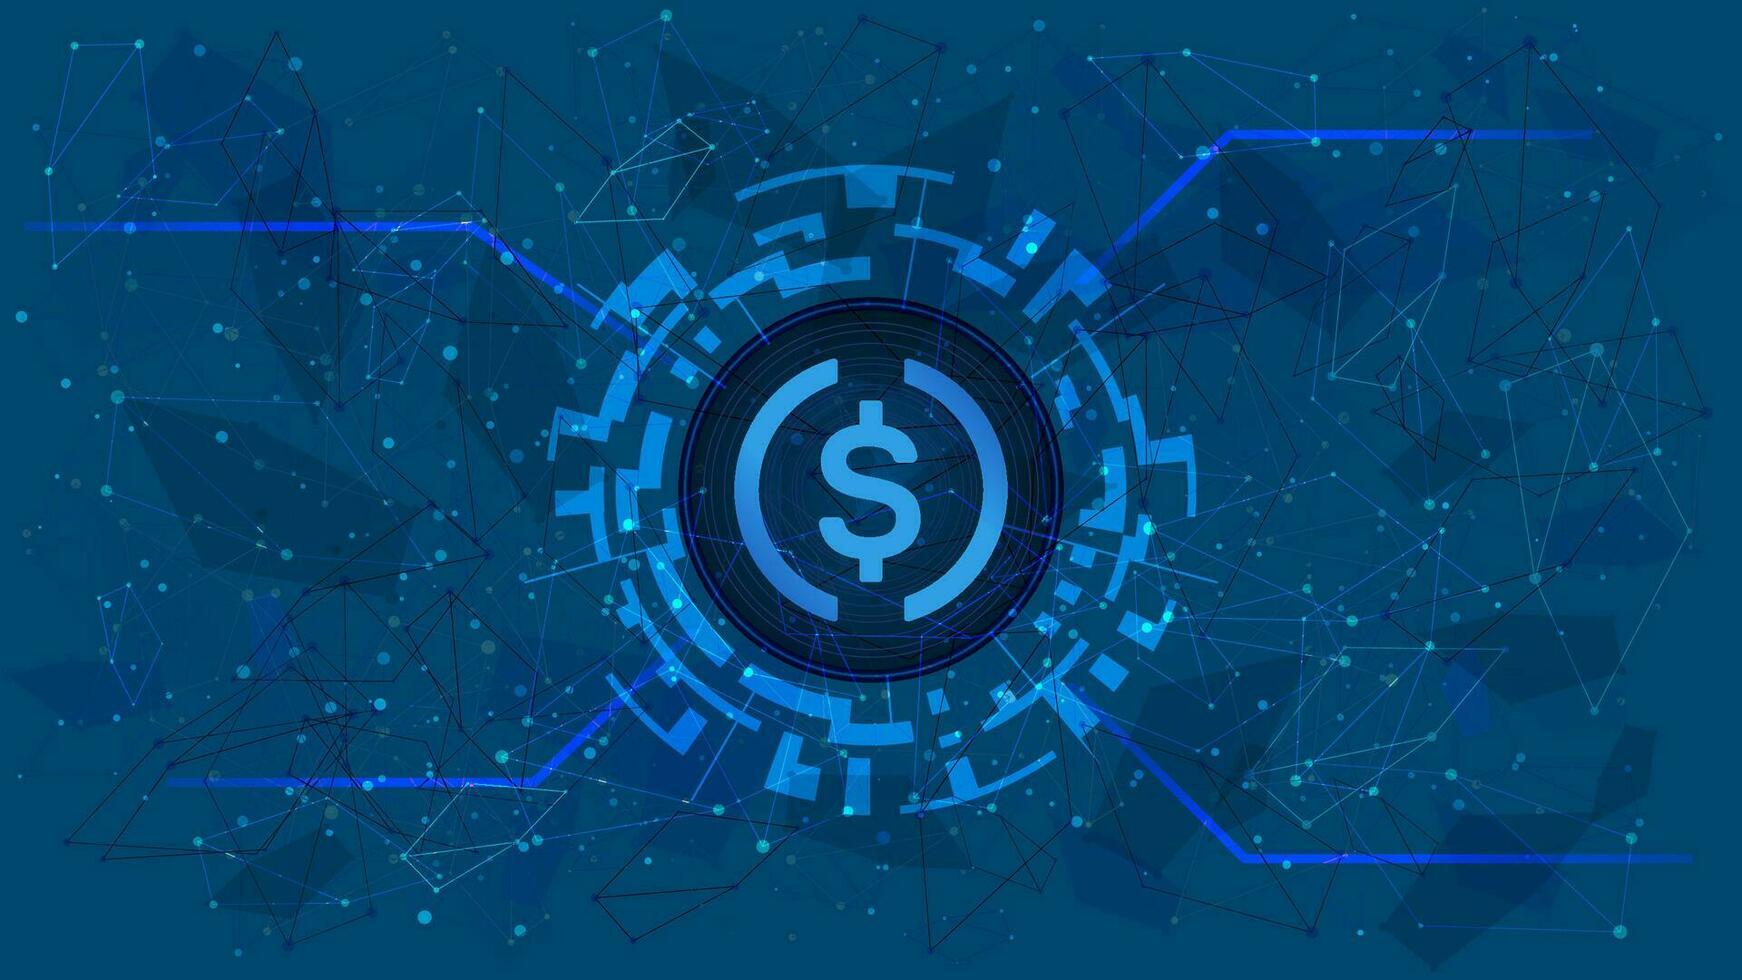 USD Coin USDC token symbol in digital circle with cryptocurrency theme on blue background. Cryptocurrency icon for banner or news. Vector illustration.